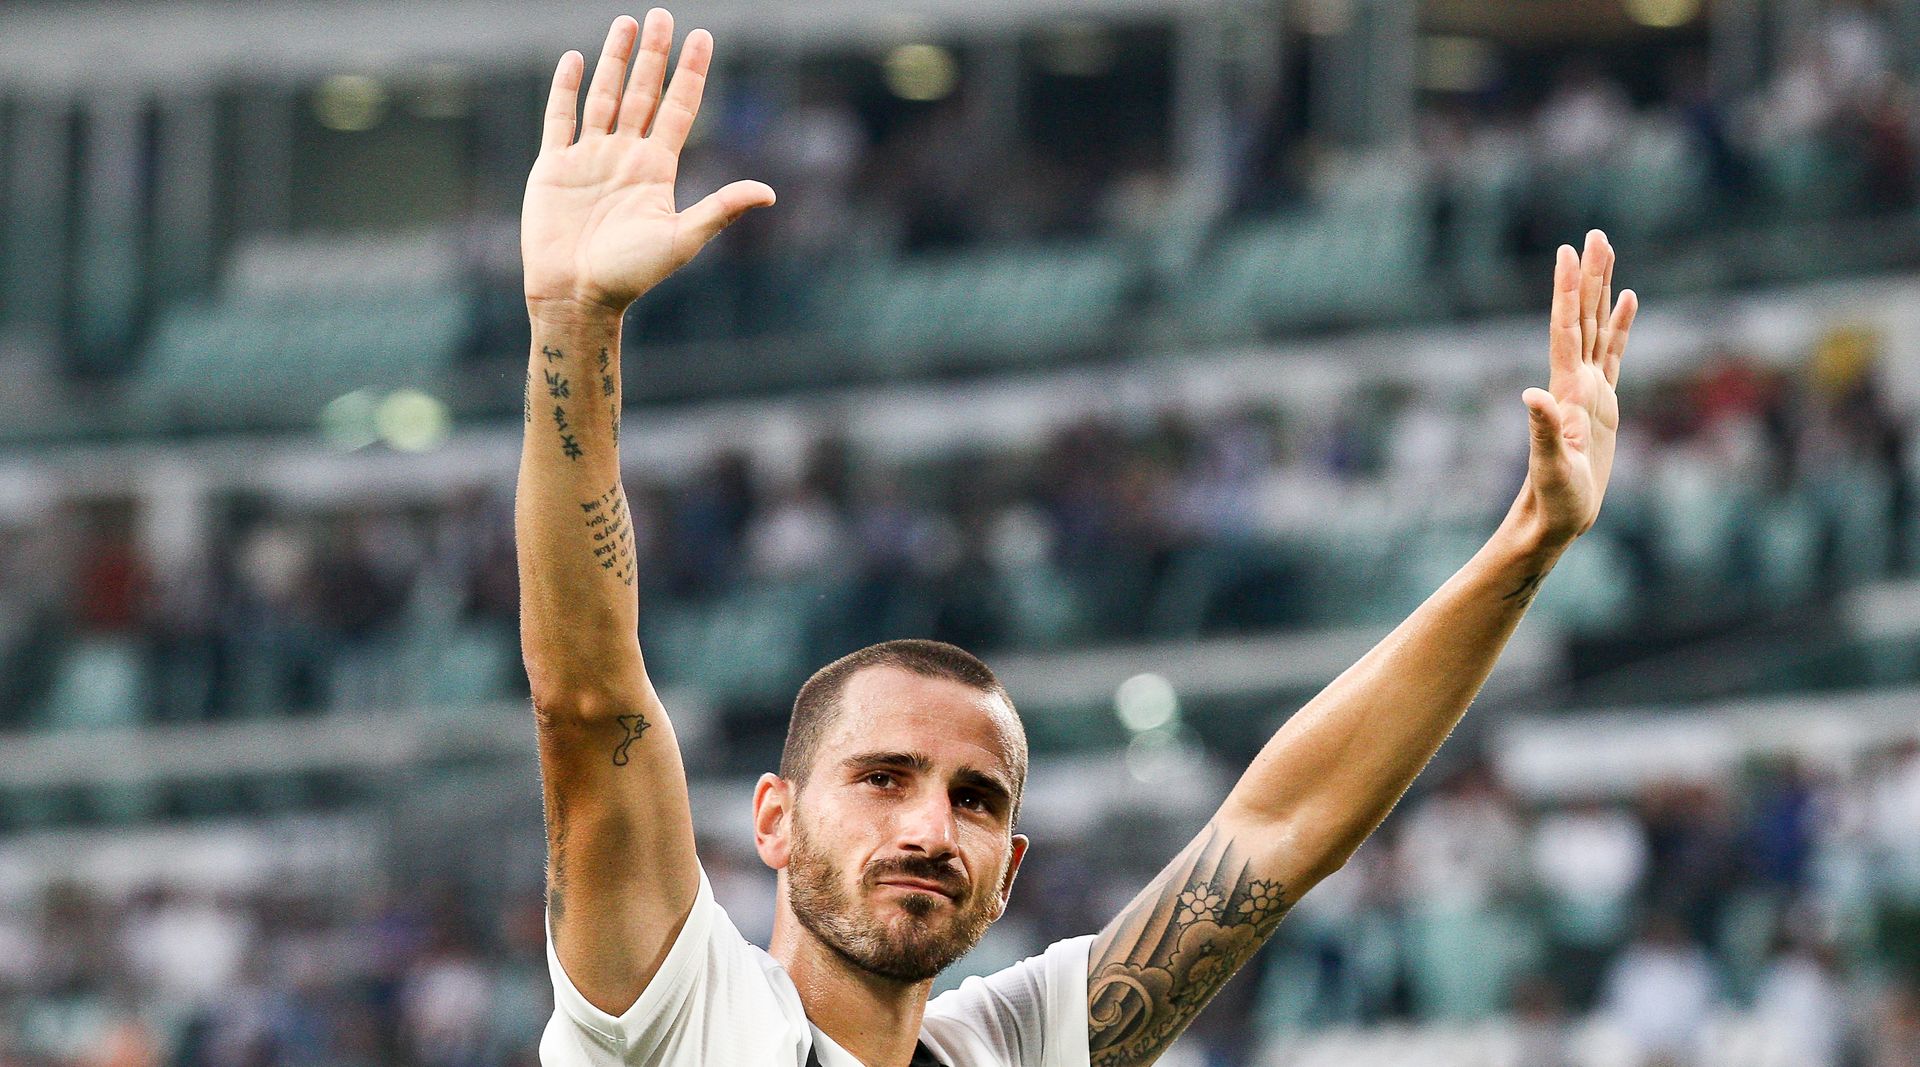 <p>                     Another integral figure in Juventus’ serial Serie A title-winning era, Leandro Bonucci joined Andrea Barzagli and Giorgio Chiellini in a formidable three-man defence for many years.                   </p>                                      <p>                     Included in the 2014/15, 2015/16 and 2016/17 Serie A Teams of the Year, Bonucci left Juve for AC Milan in 2017 – only to return 12 months later and win his seventh Scudetto of the 10s.                   </p>